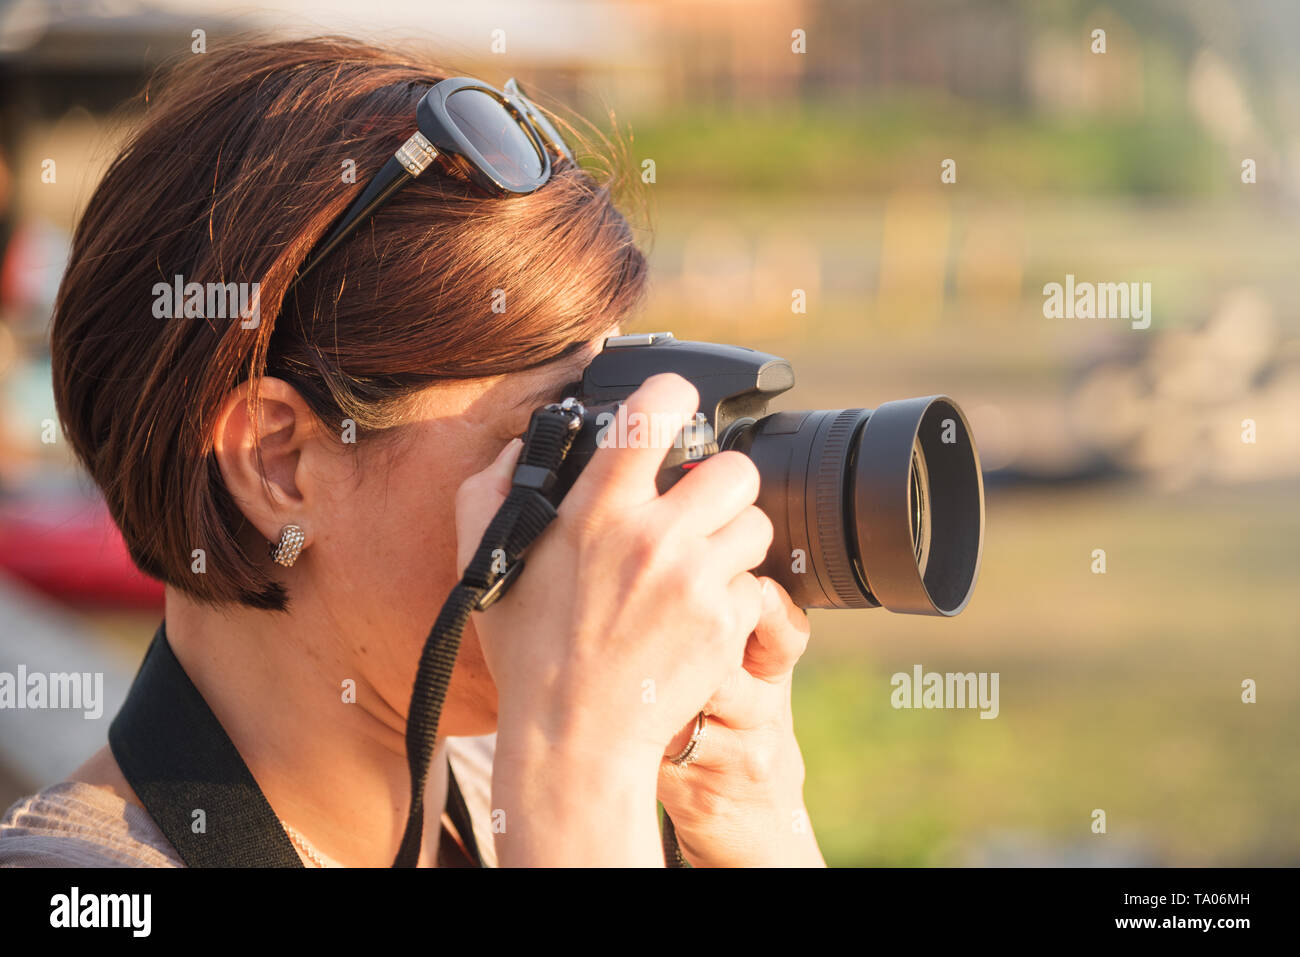 Woman Professional Photographer Taking photos with a DSRL Camera  in a park at Sunset. Stock Photo